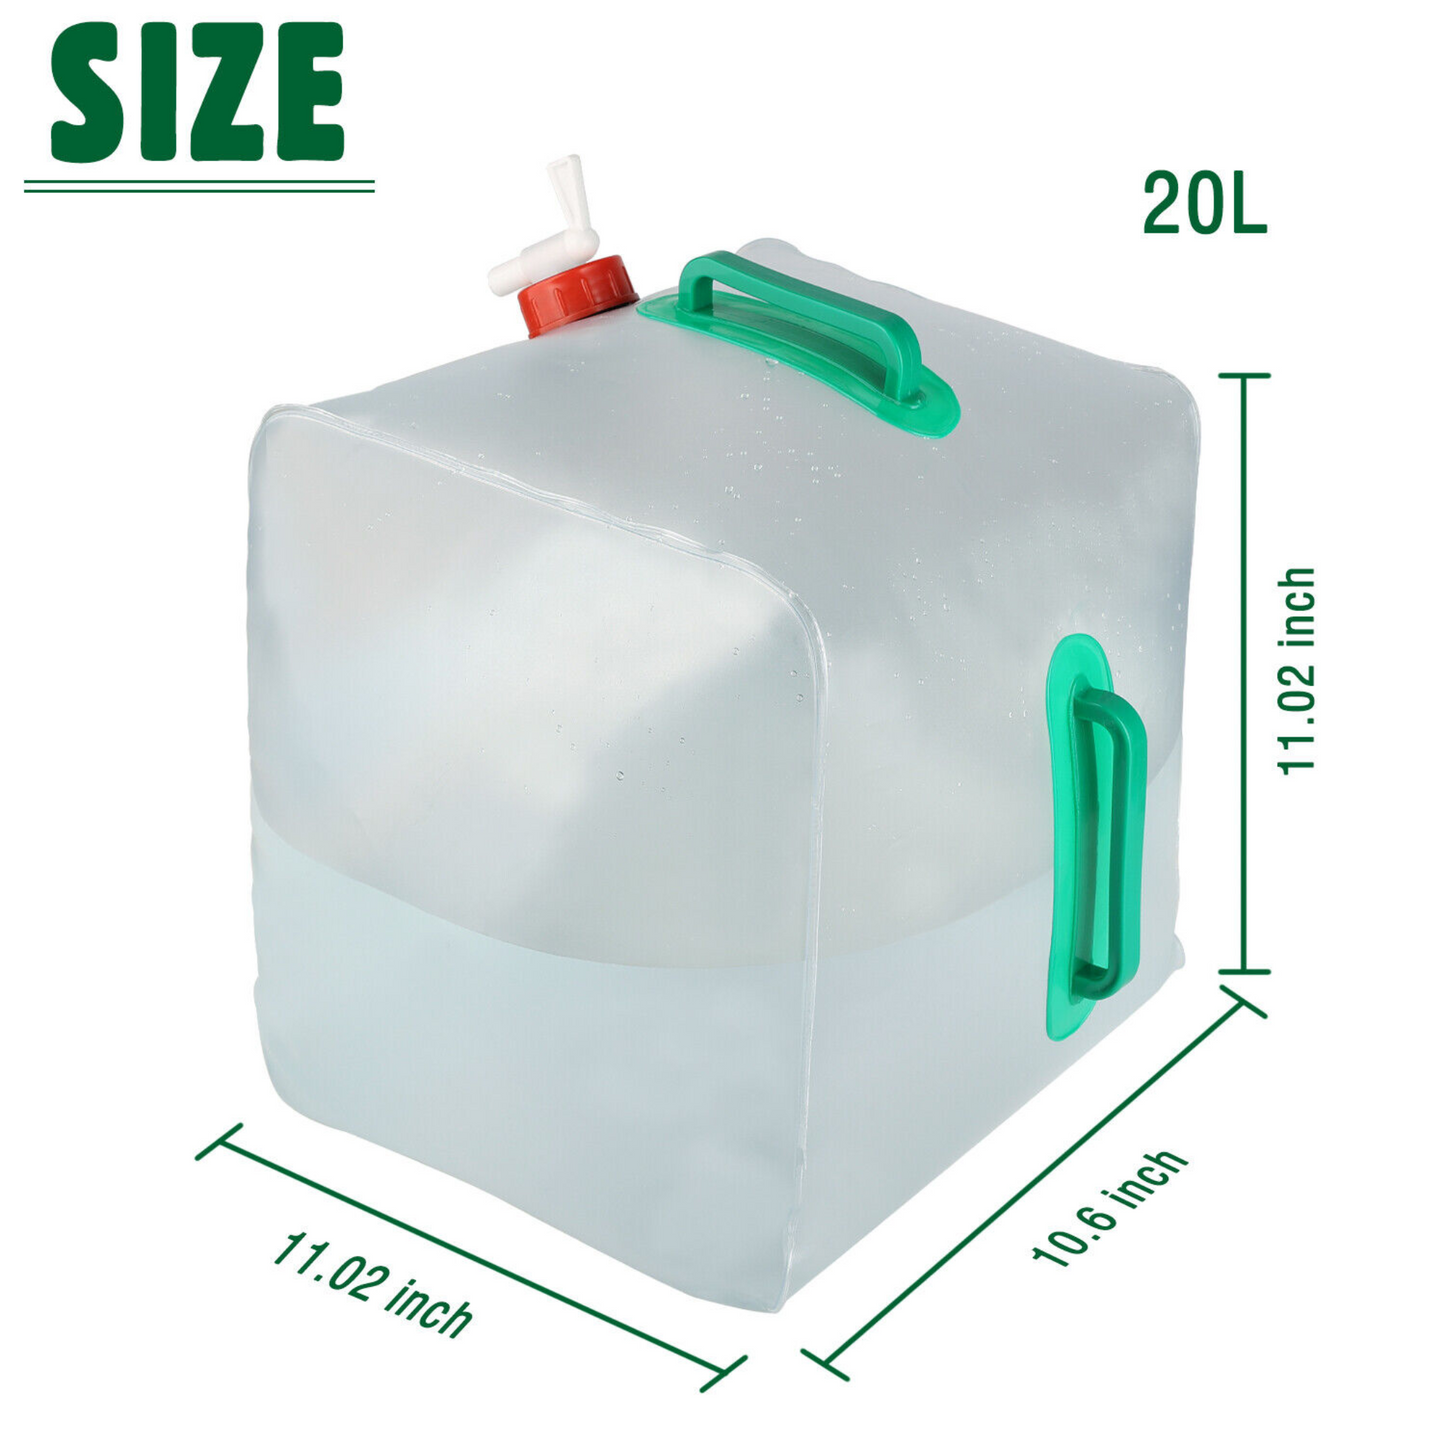 5.2 Gallon Water Storage Jug with Spigot - Easy Dispensing and Space-Saving Collapsible Design